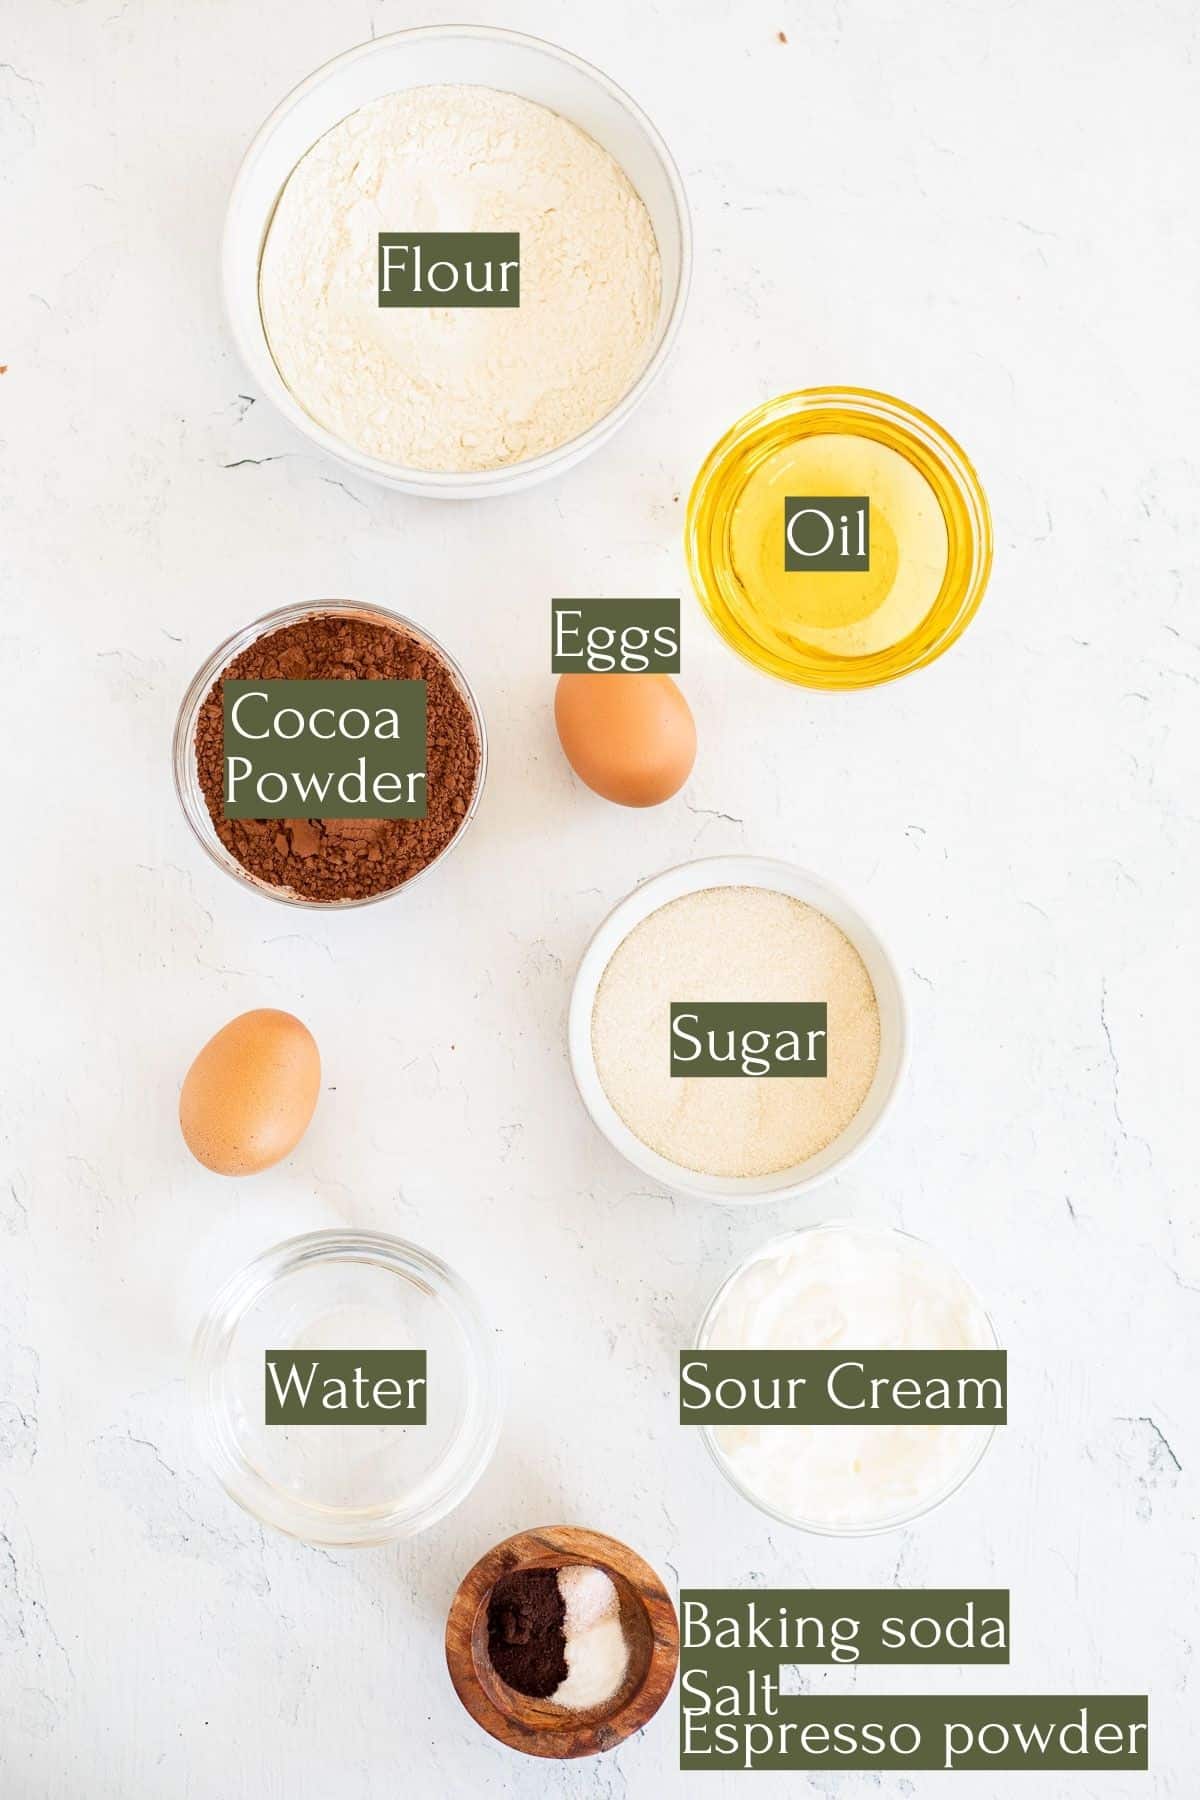 ingredients to make a fudgy chocolate layer cake.